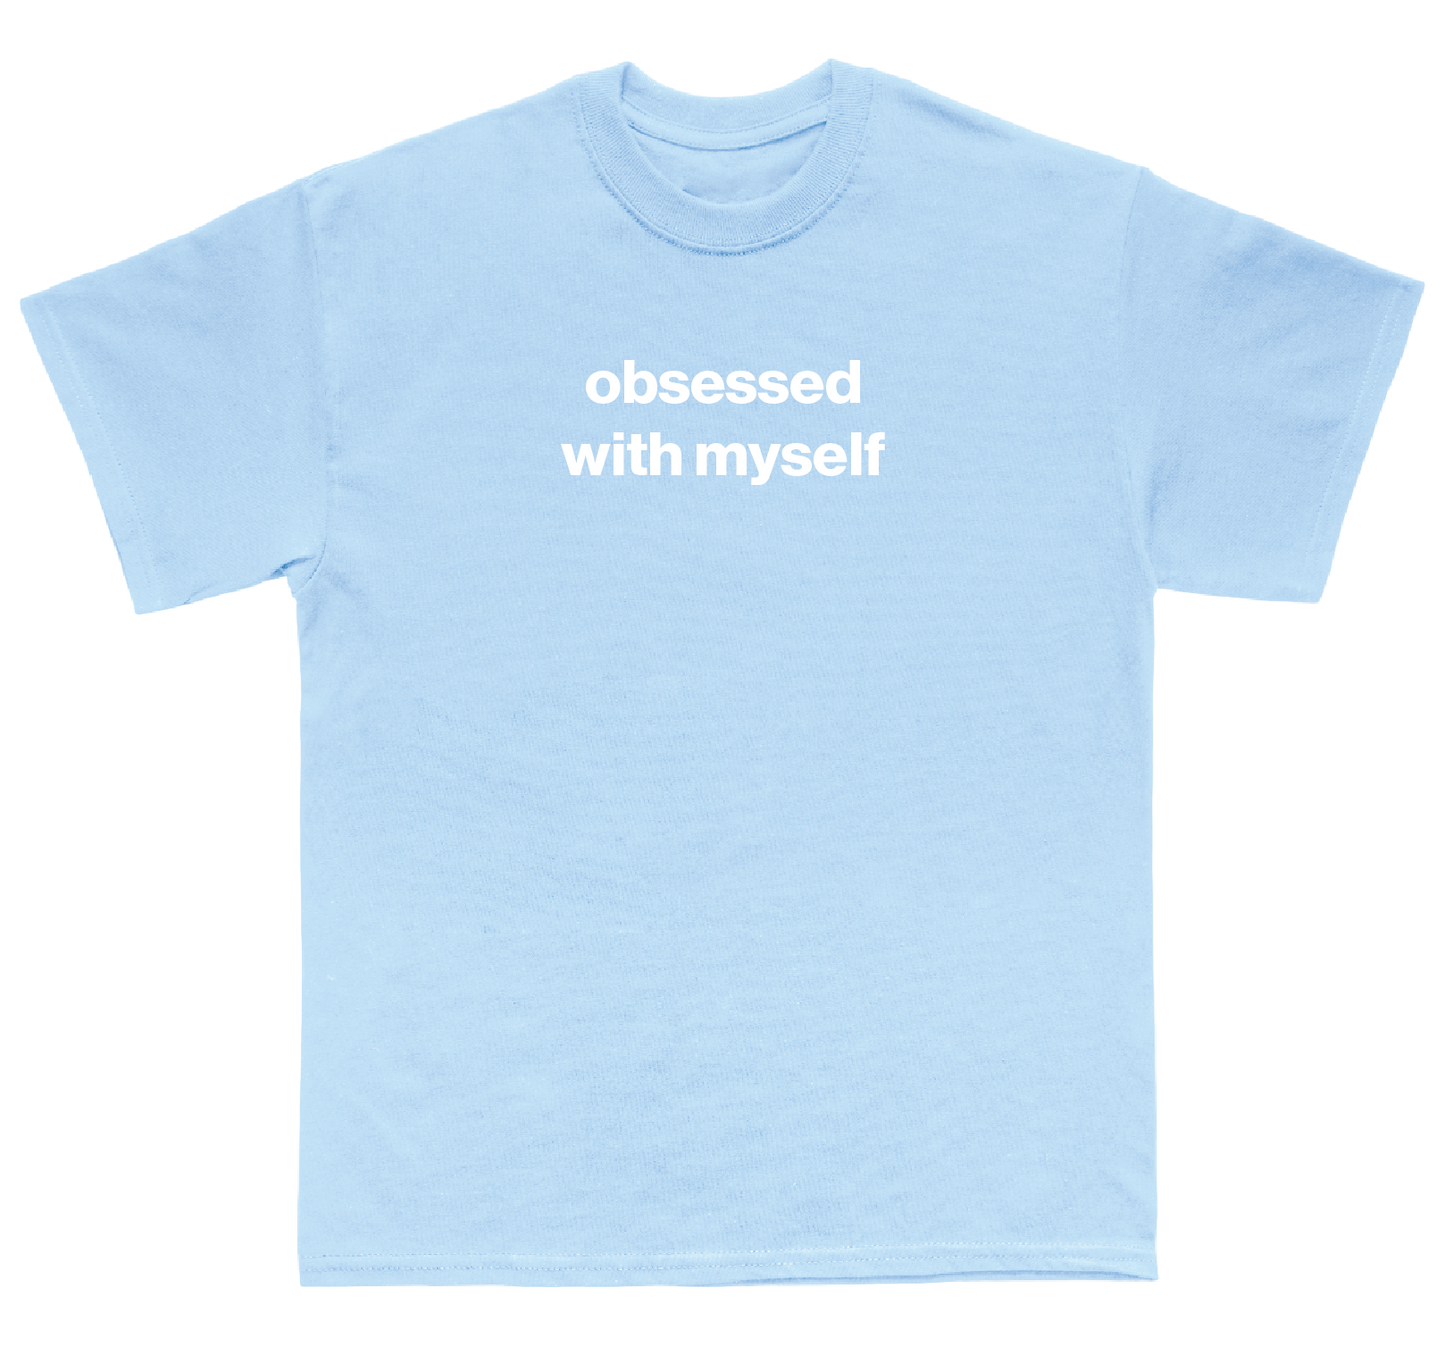 obsessed with myself shirt